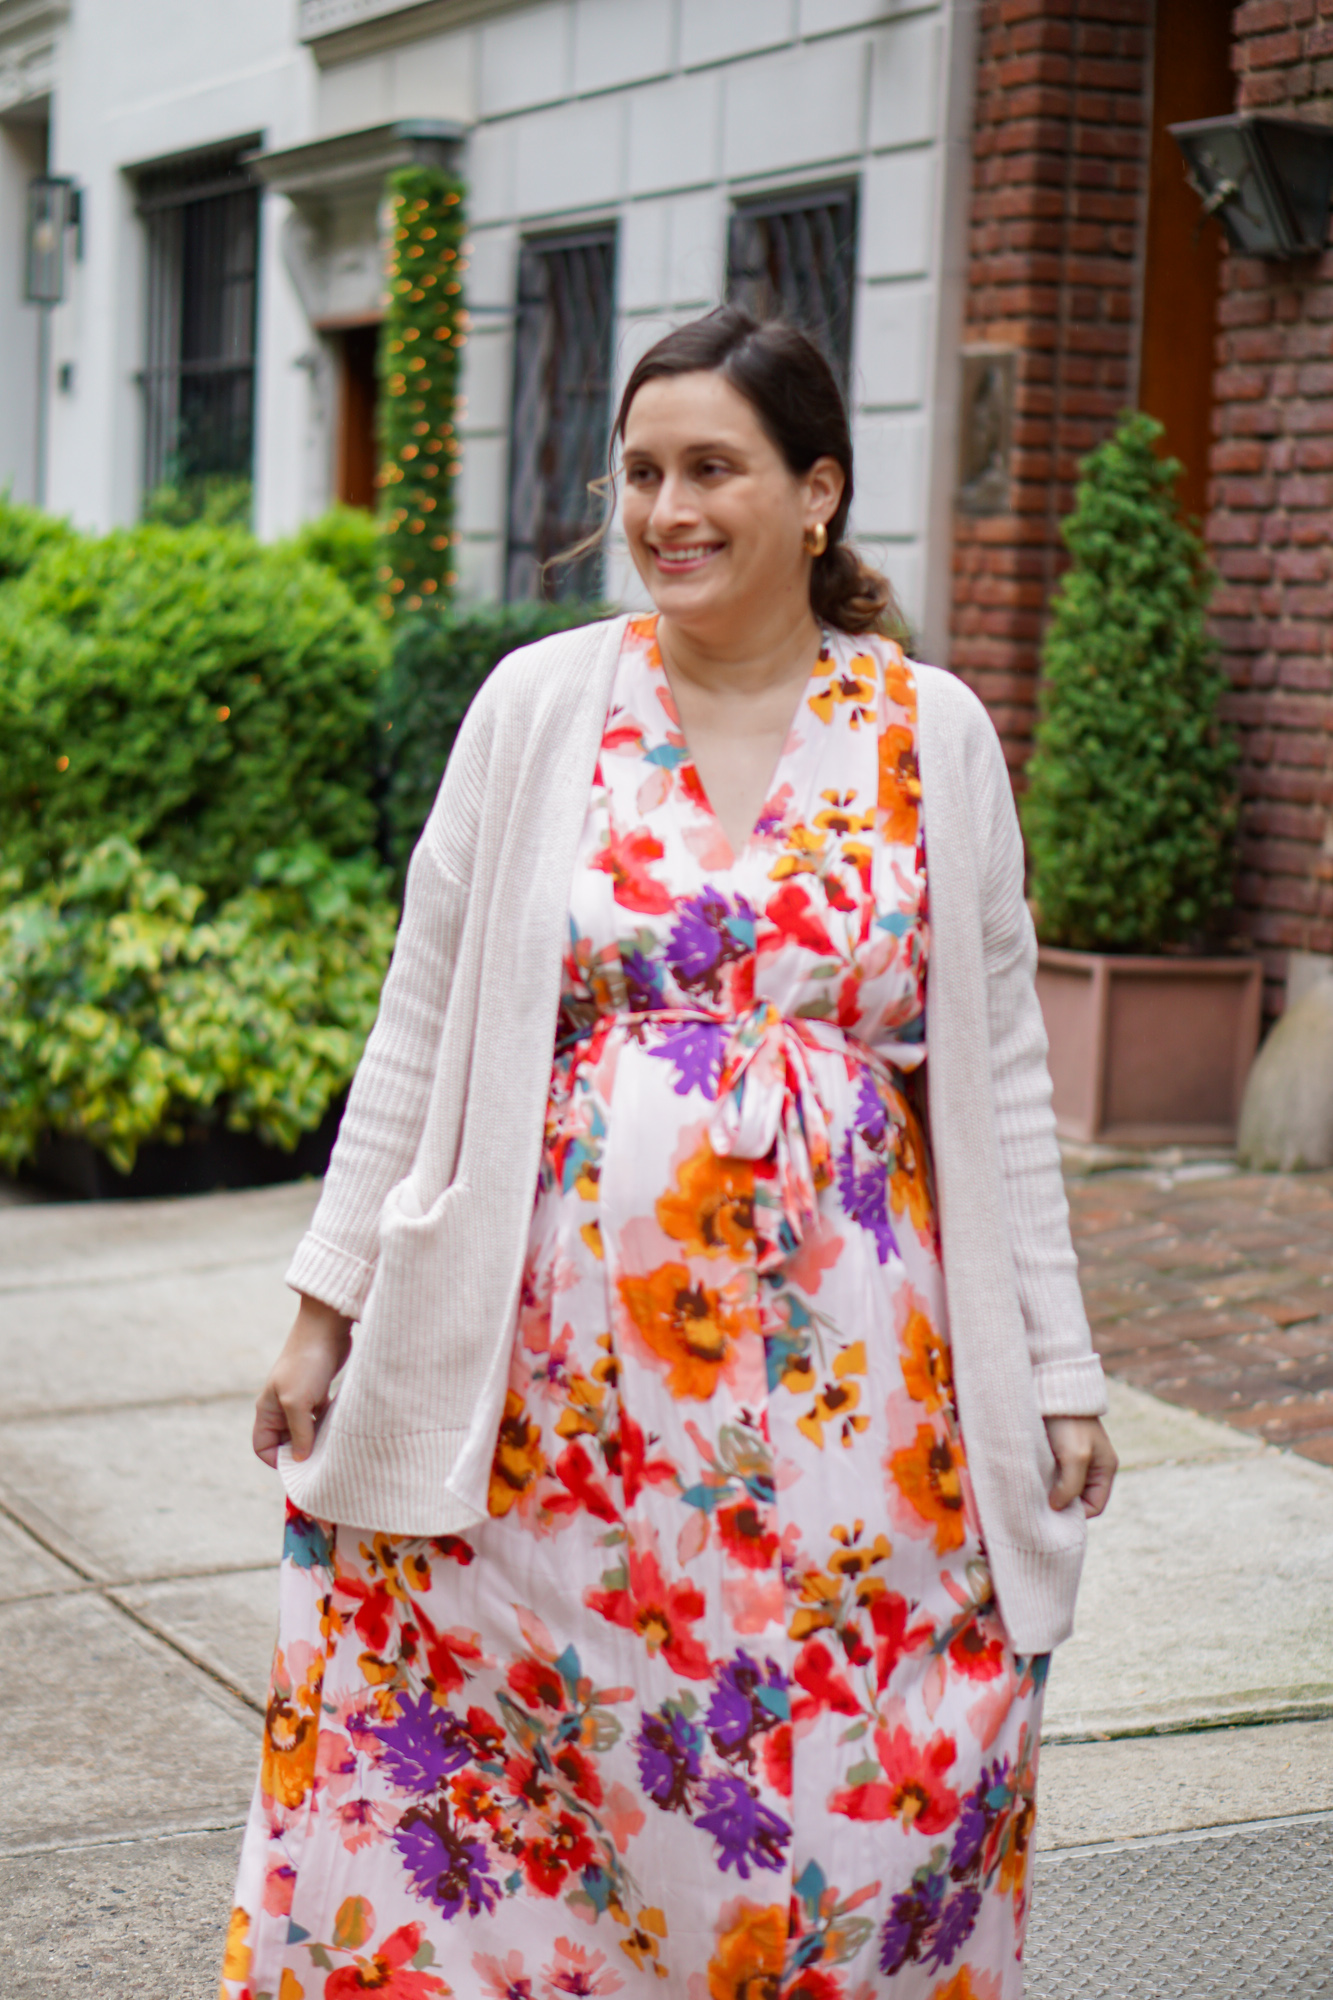 Floral dress and cardigan